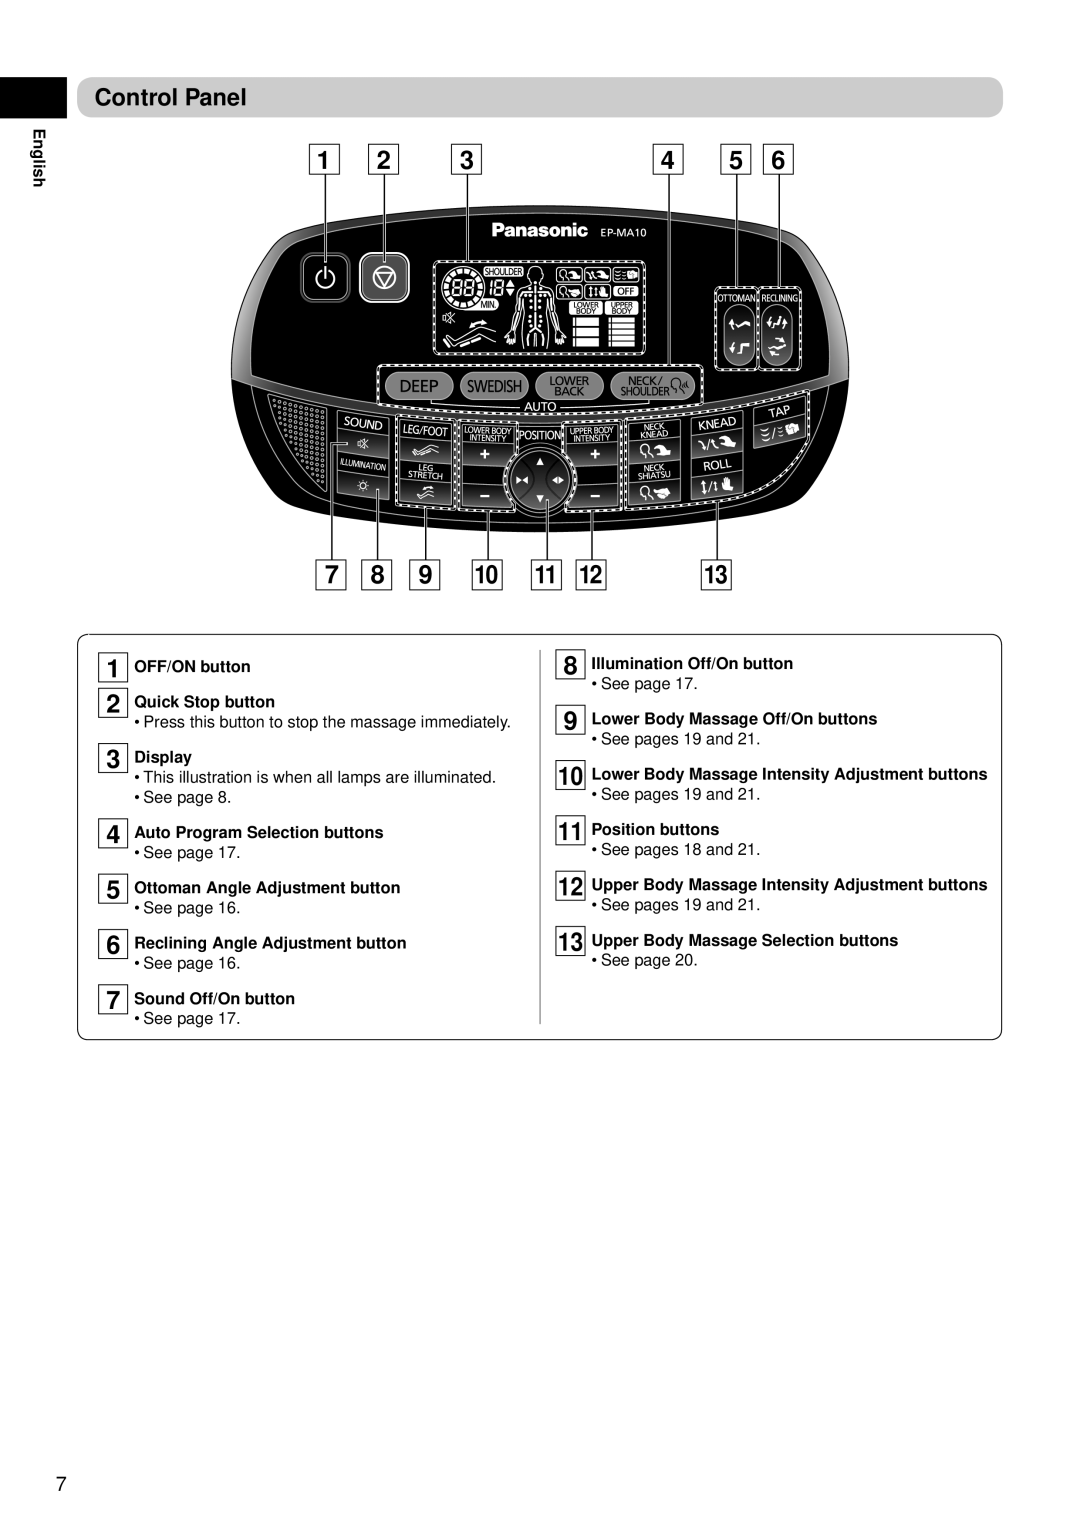 Panasonic EP-MA10 manual Control Panel, Press this button to stop the massage immediately 